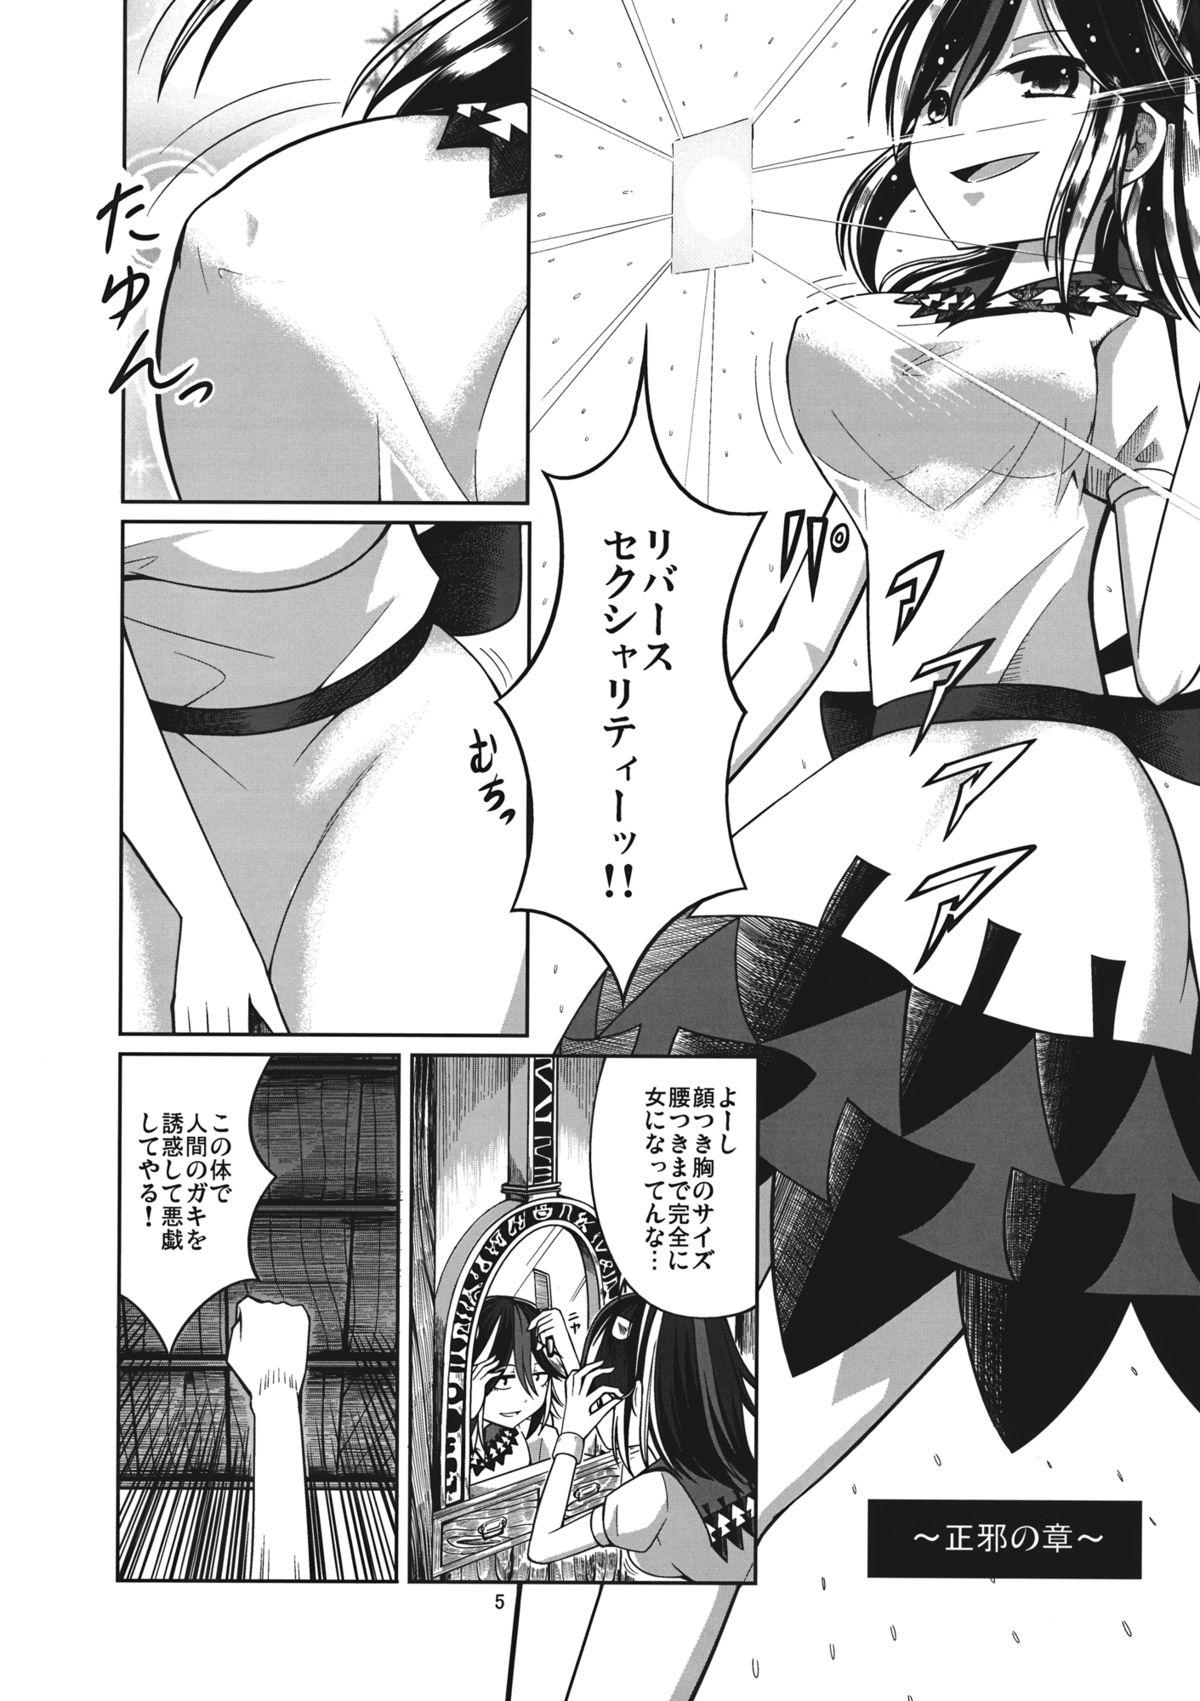 Matures Reverse Sexuality - Touhou project Retro - Page 4